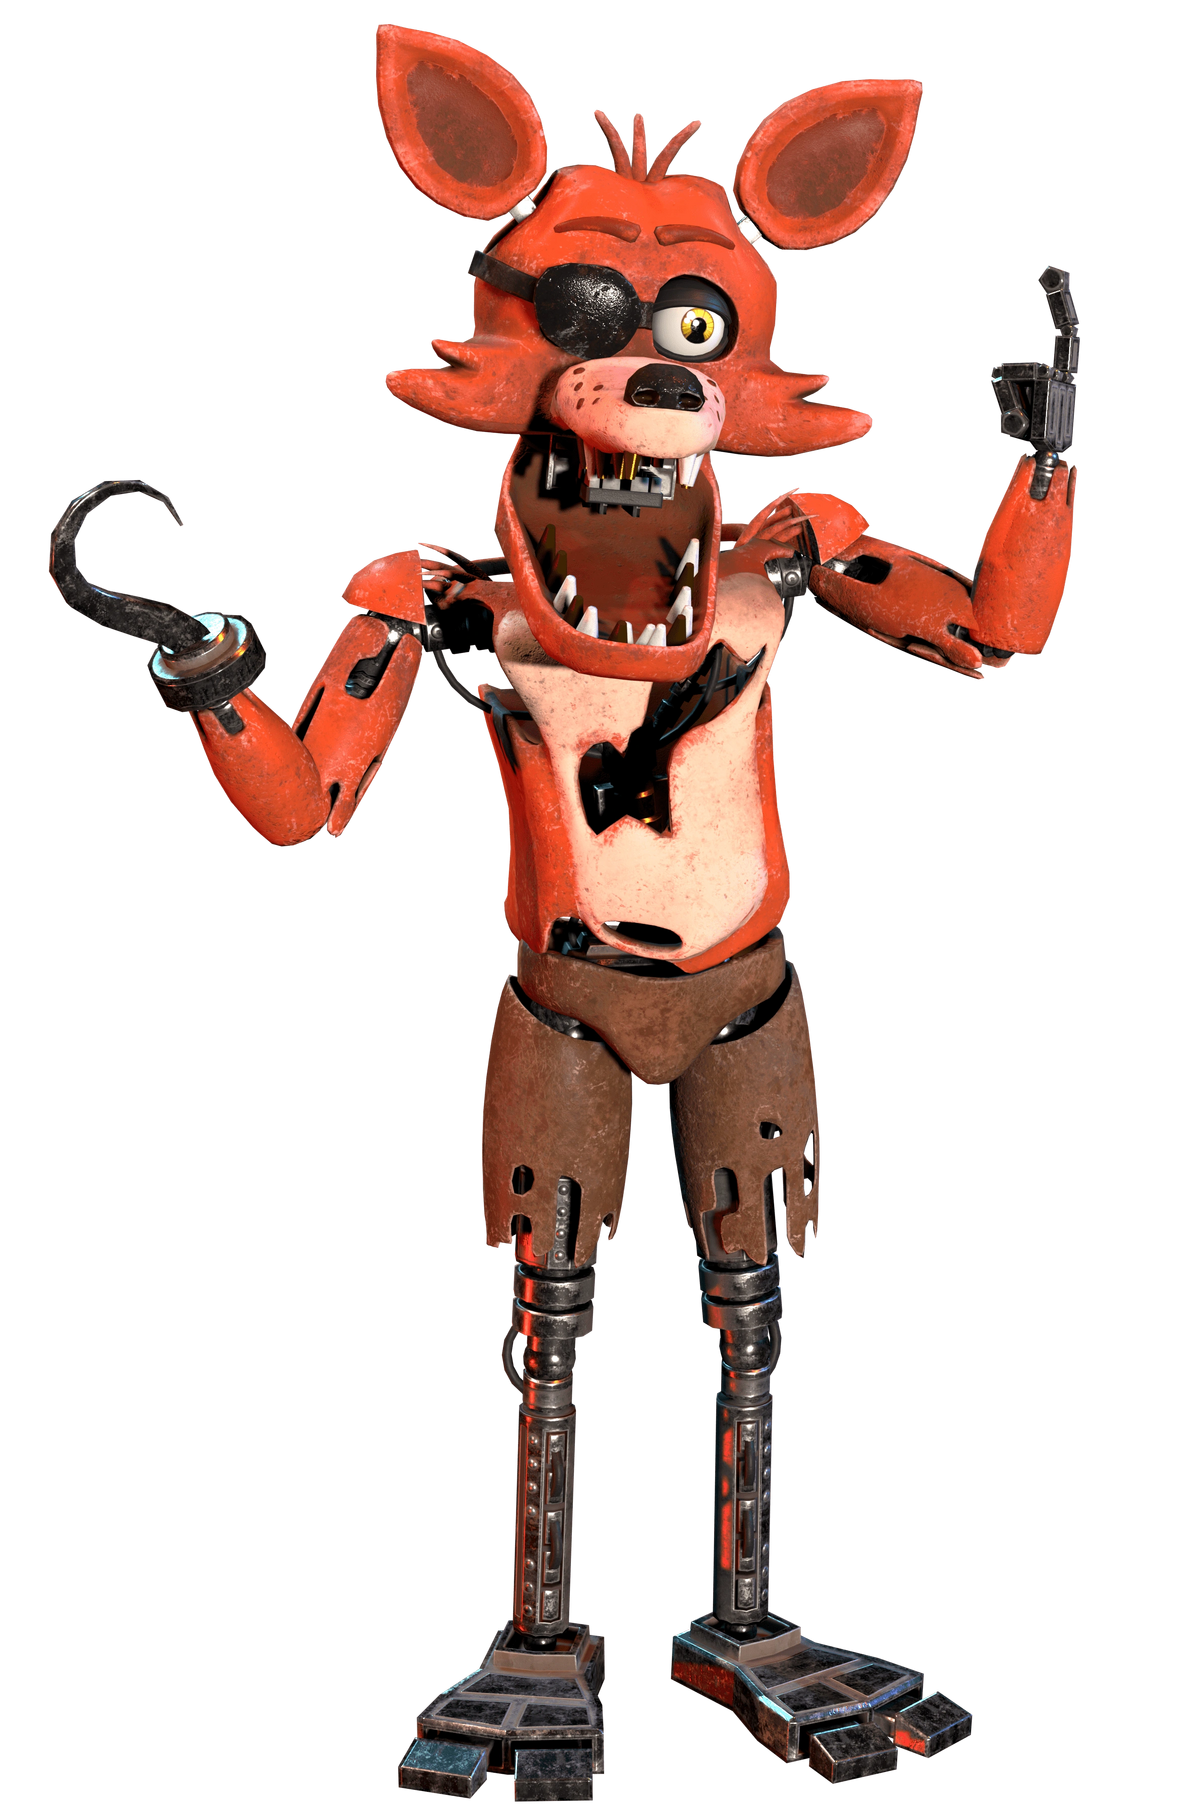 Stream A Withered Foxy Megalovania by Withered Foxy the Pirate